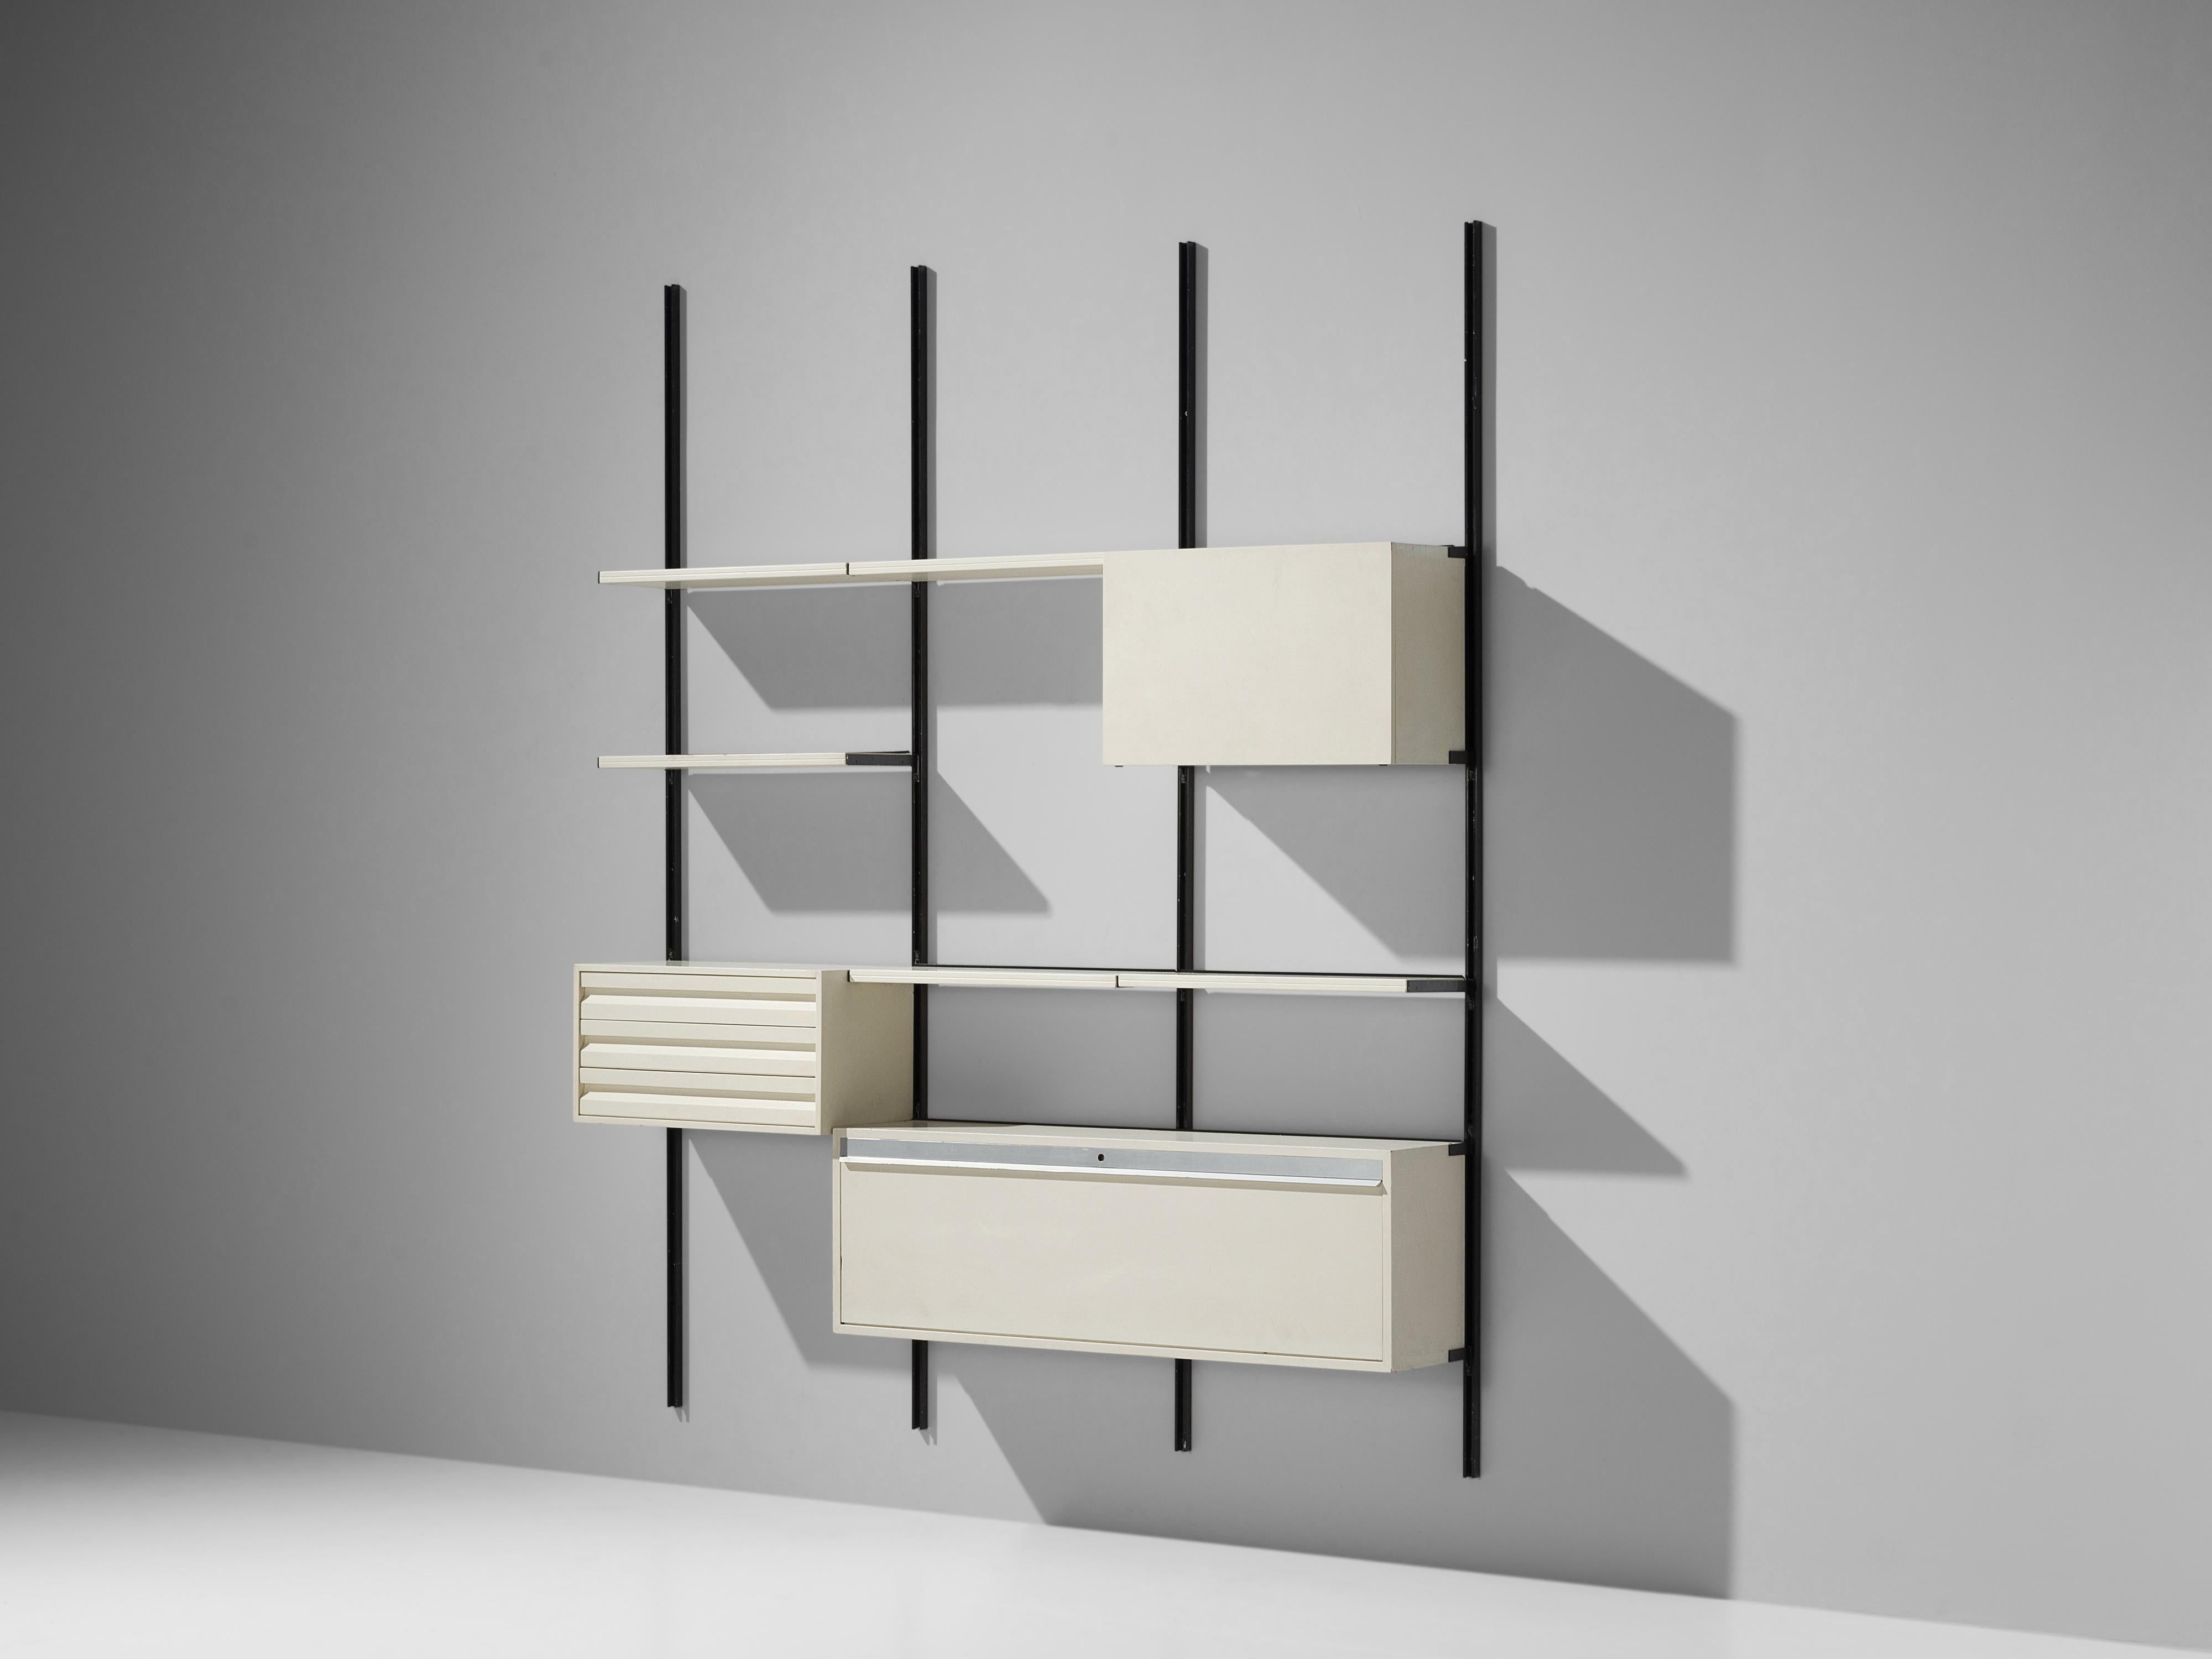 Osvaldo Borsani for Tecno, wall-mounted wall unit, metal, white laminated wood, Italy, 1950s 

This wall mounted shelving system was designed by Osvaldo Borsani. Its purpose was a coordinated system for furnishing either the home or office. The